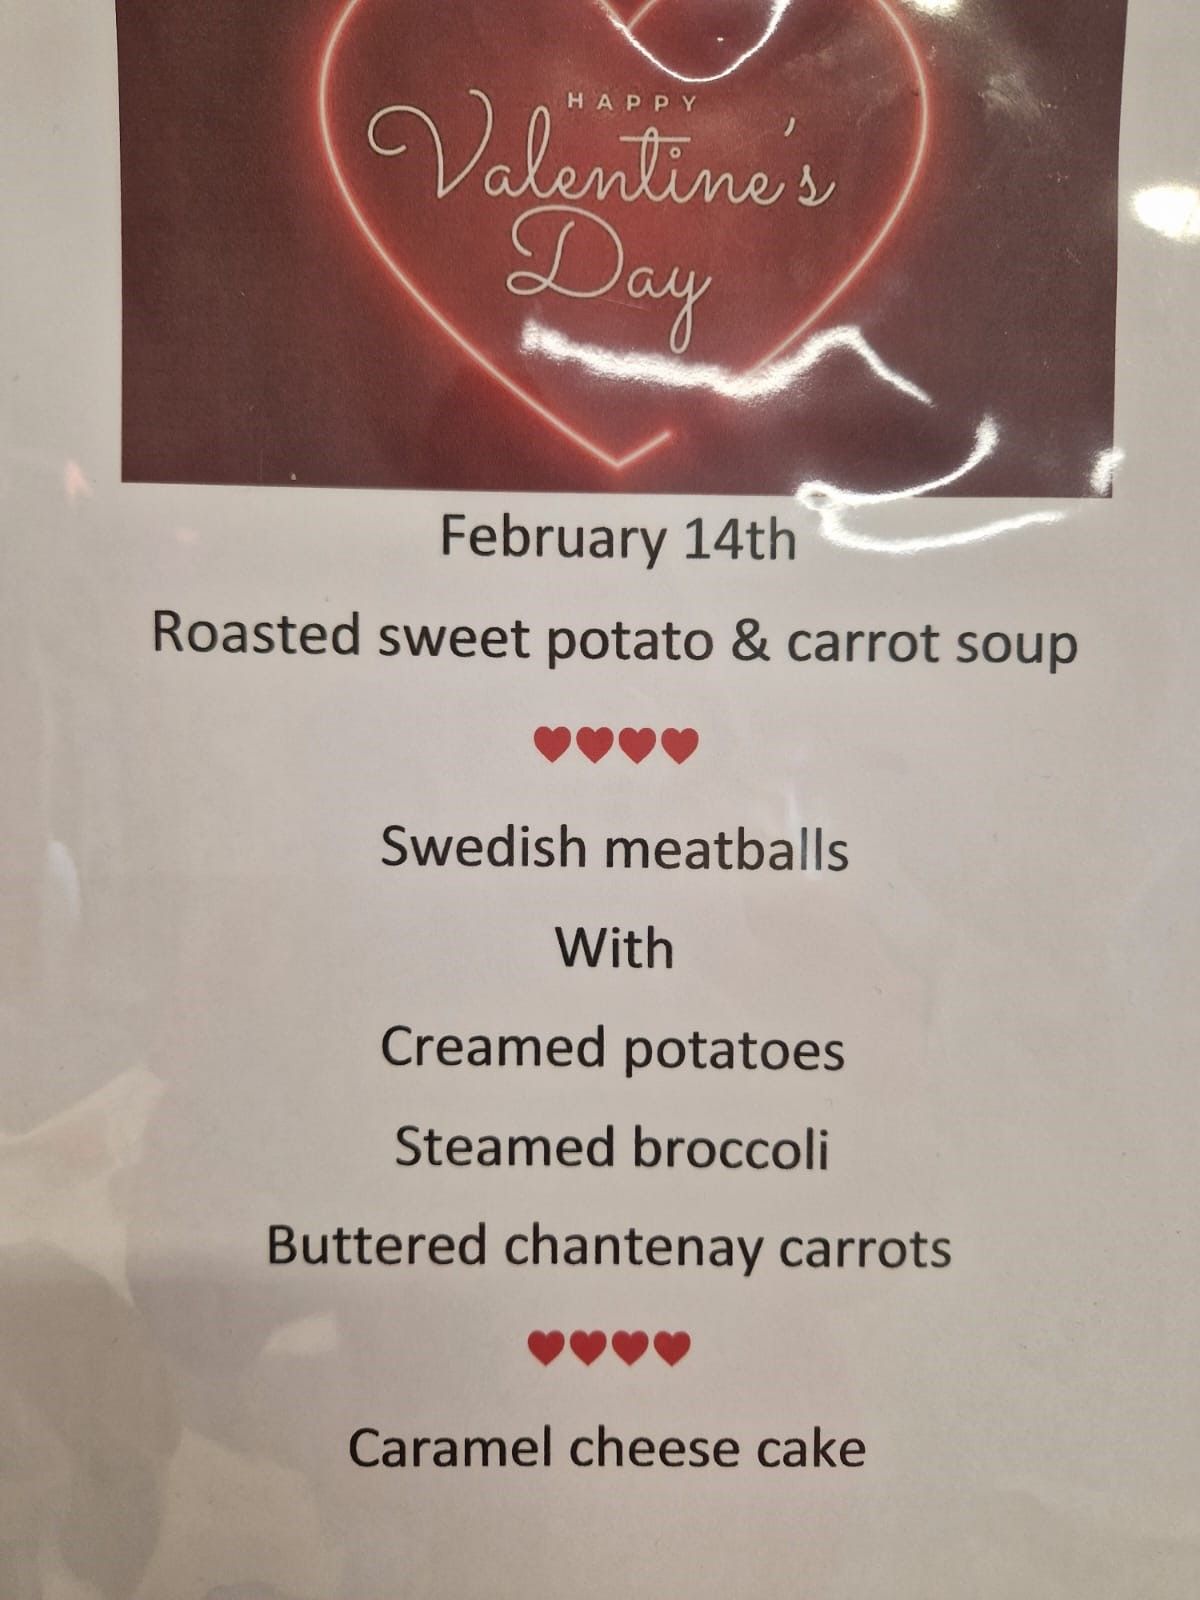 Valentines Day at Mayfield Court